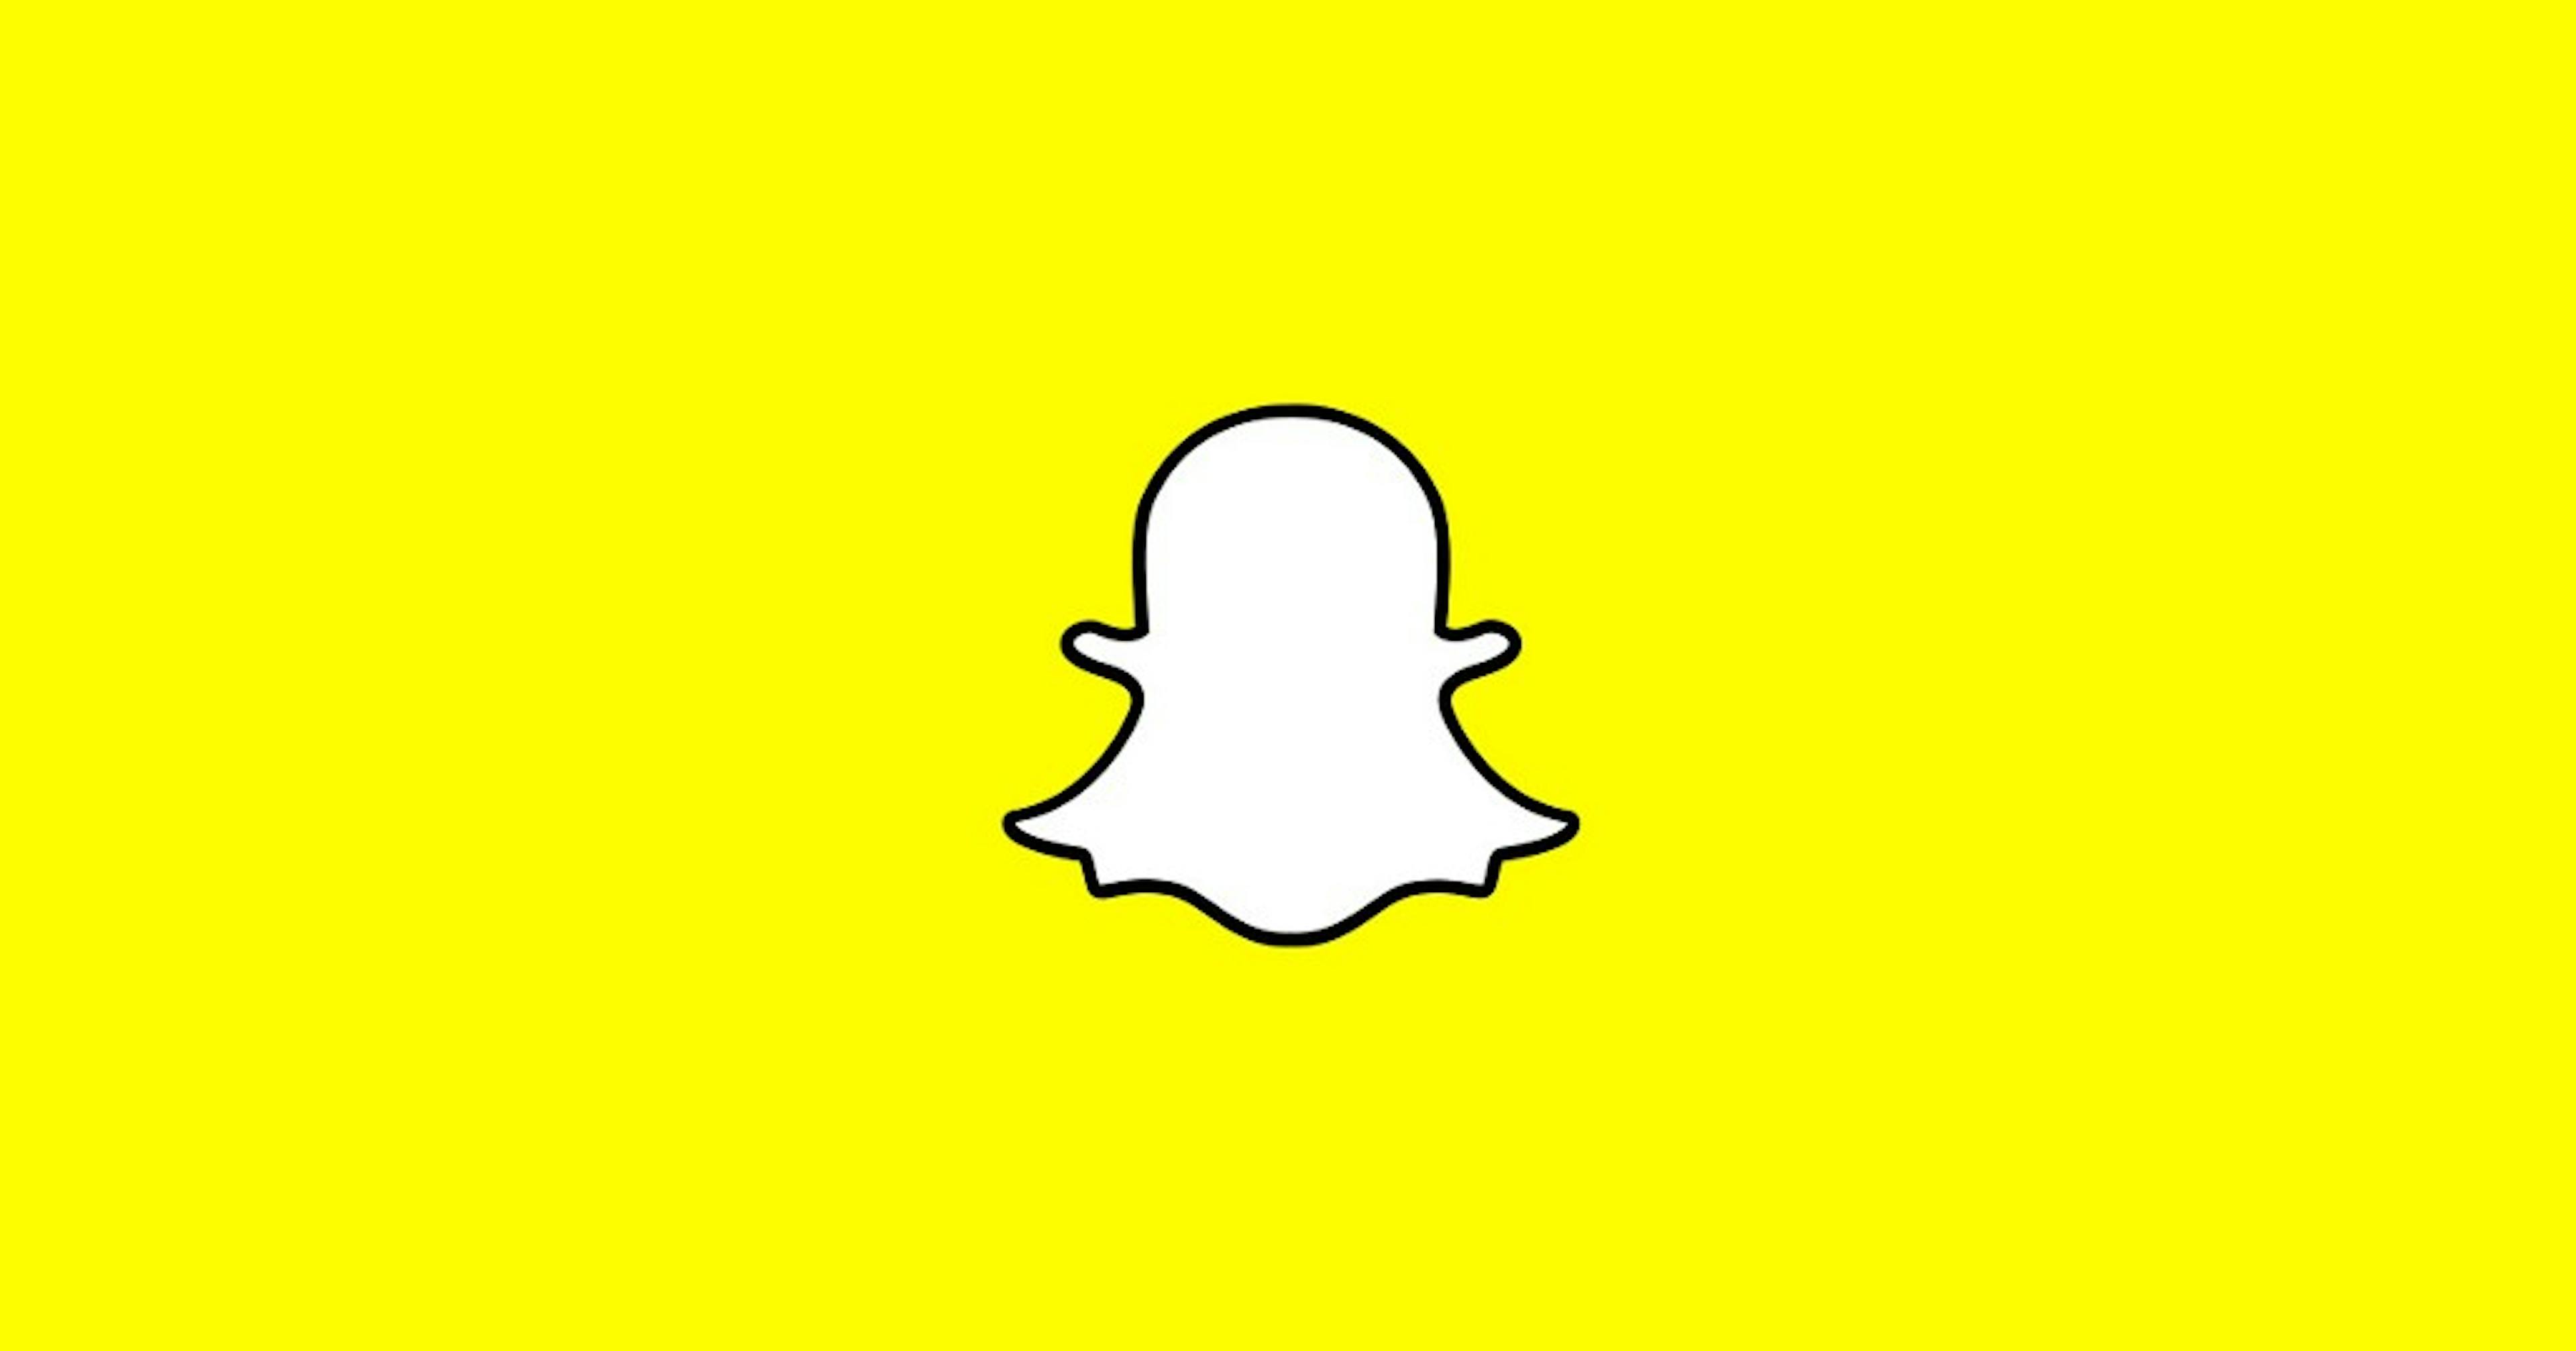 /why-snapchats-design-will-definitely-make-it-the-most-popular-in-the-long-run-7e207434c7ad feature image